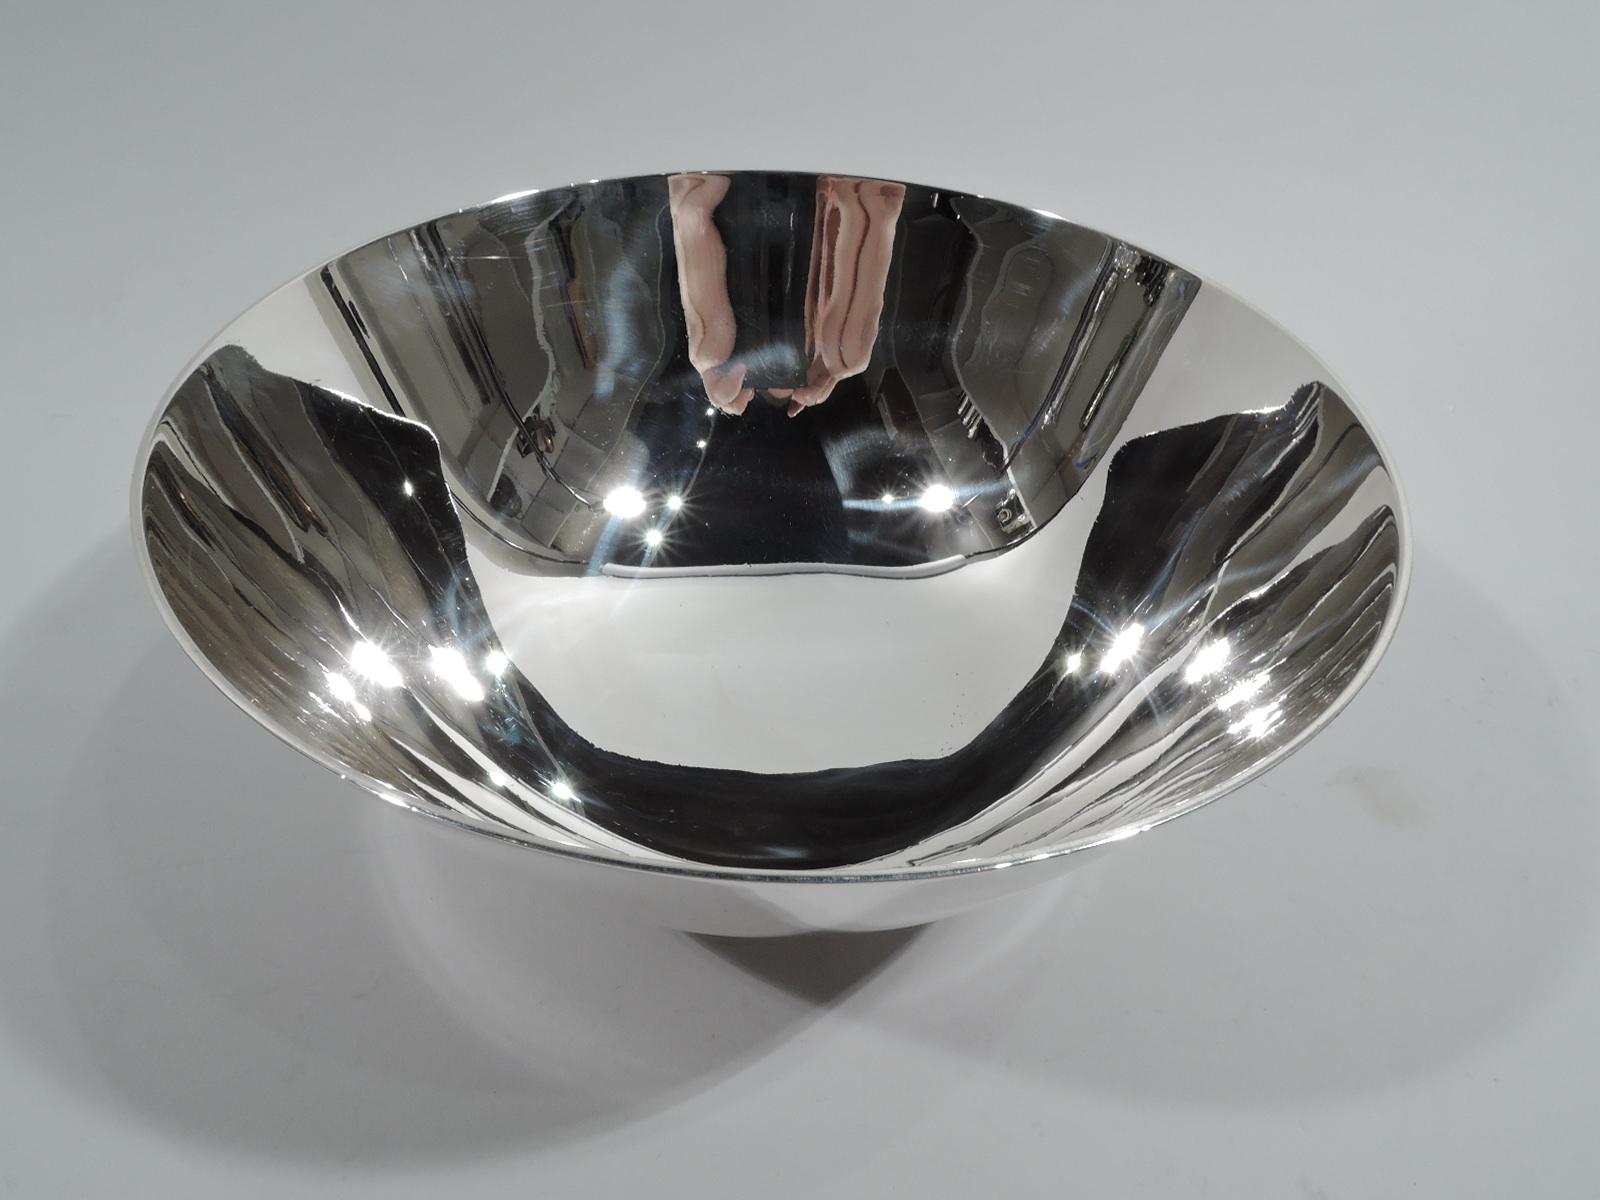 American Colonial sterling silver bowl. Made by Tiffany in New York, circa 1920. Bowl has curved sides and straight circular foot. Spare historic design that works equally well in Modern interiors. Fully marked including maker’s stamp, pattern no.